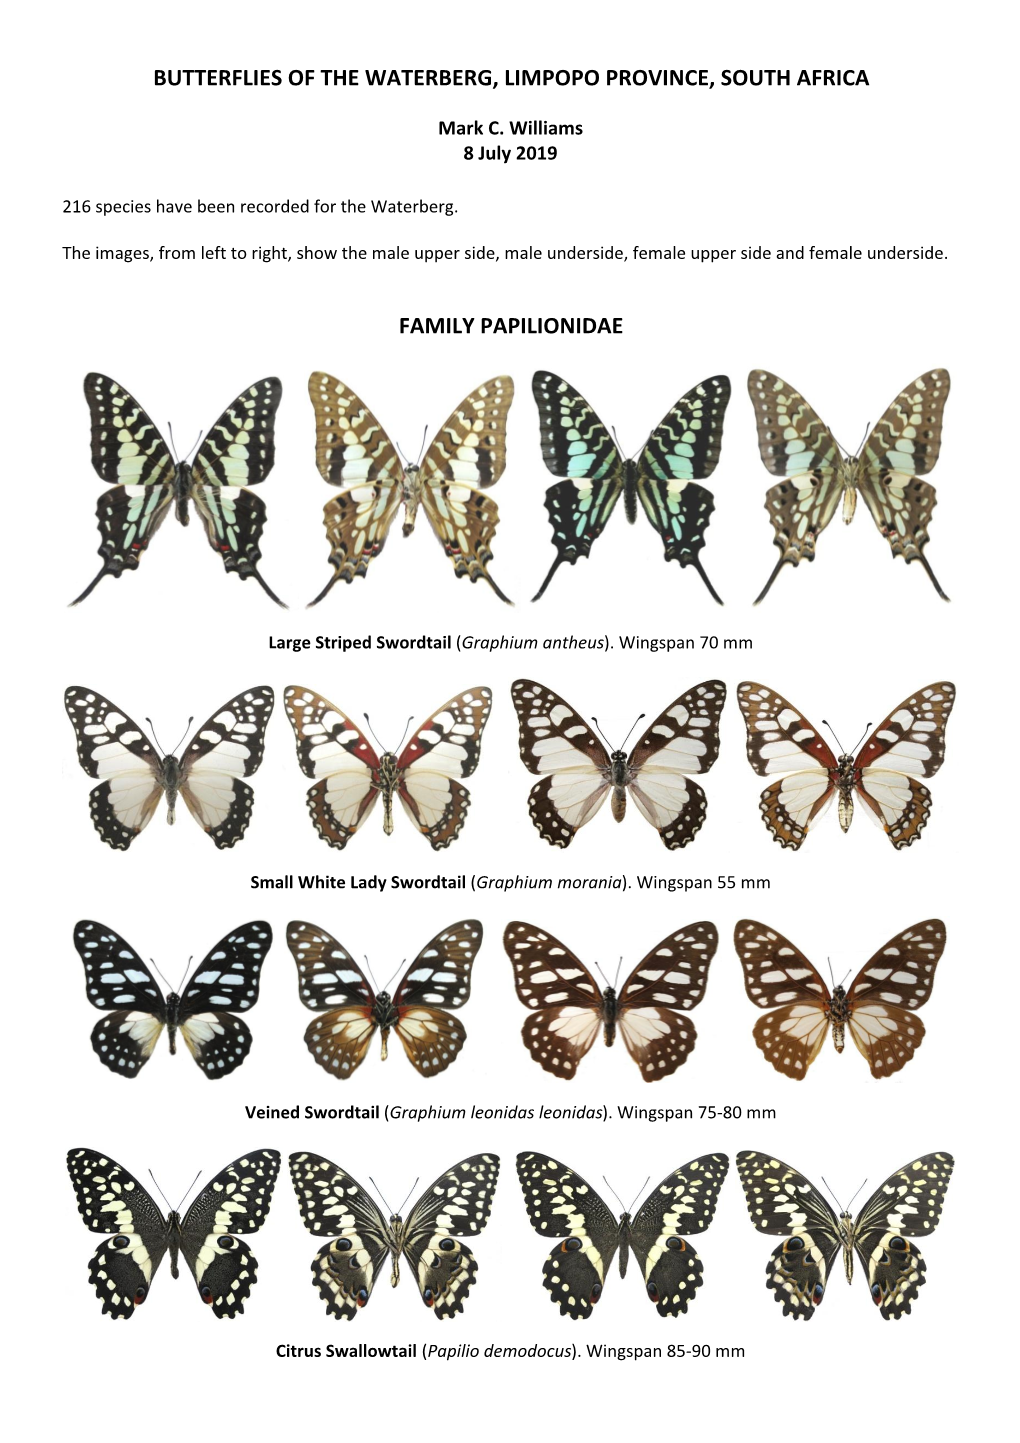 Checklist and Atlas of Butterflies for The